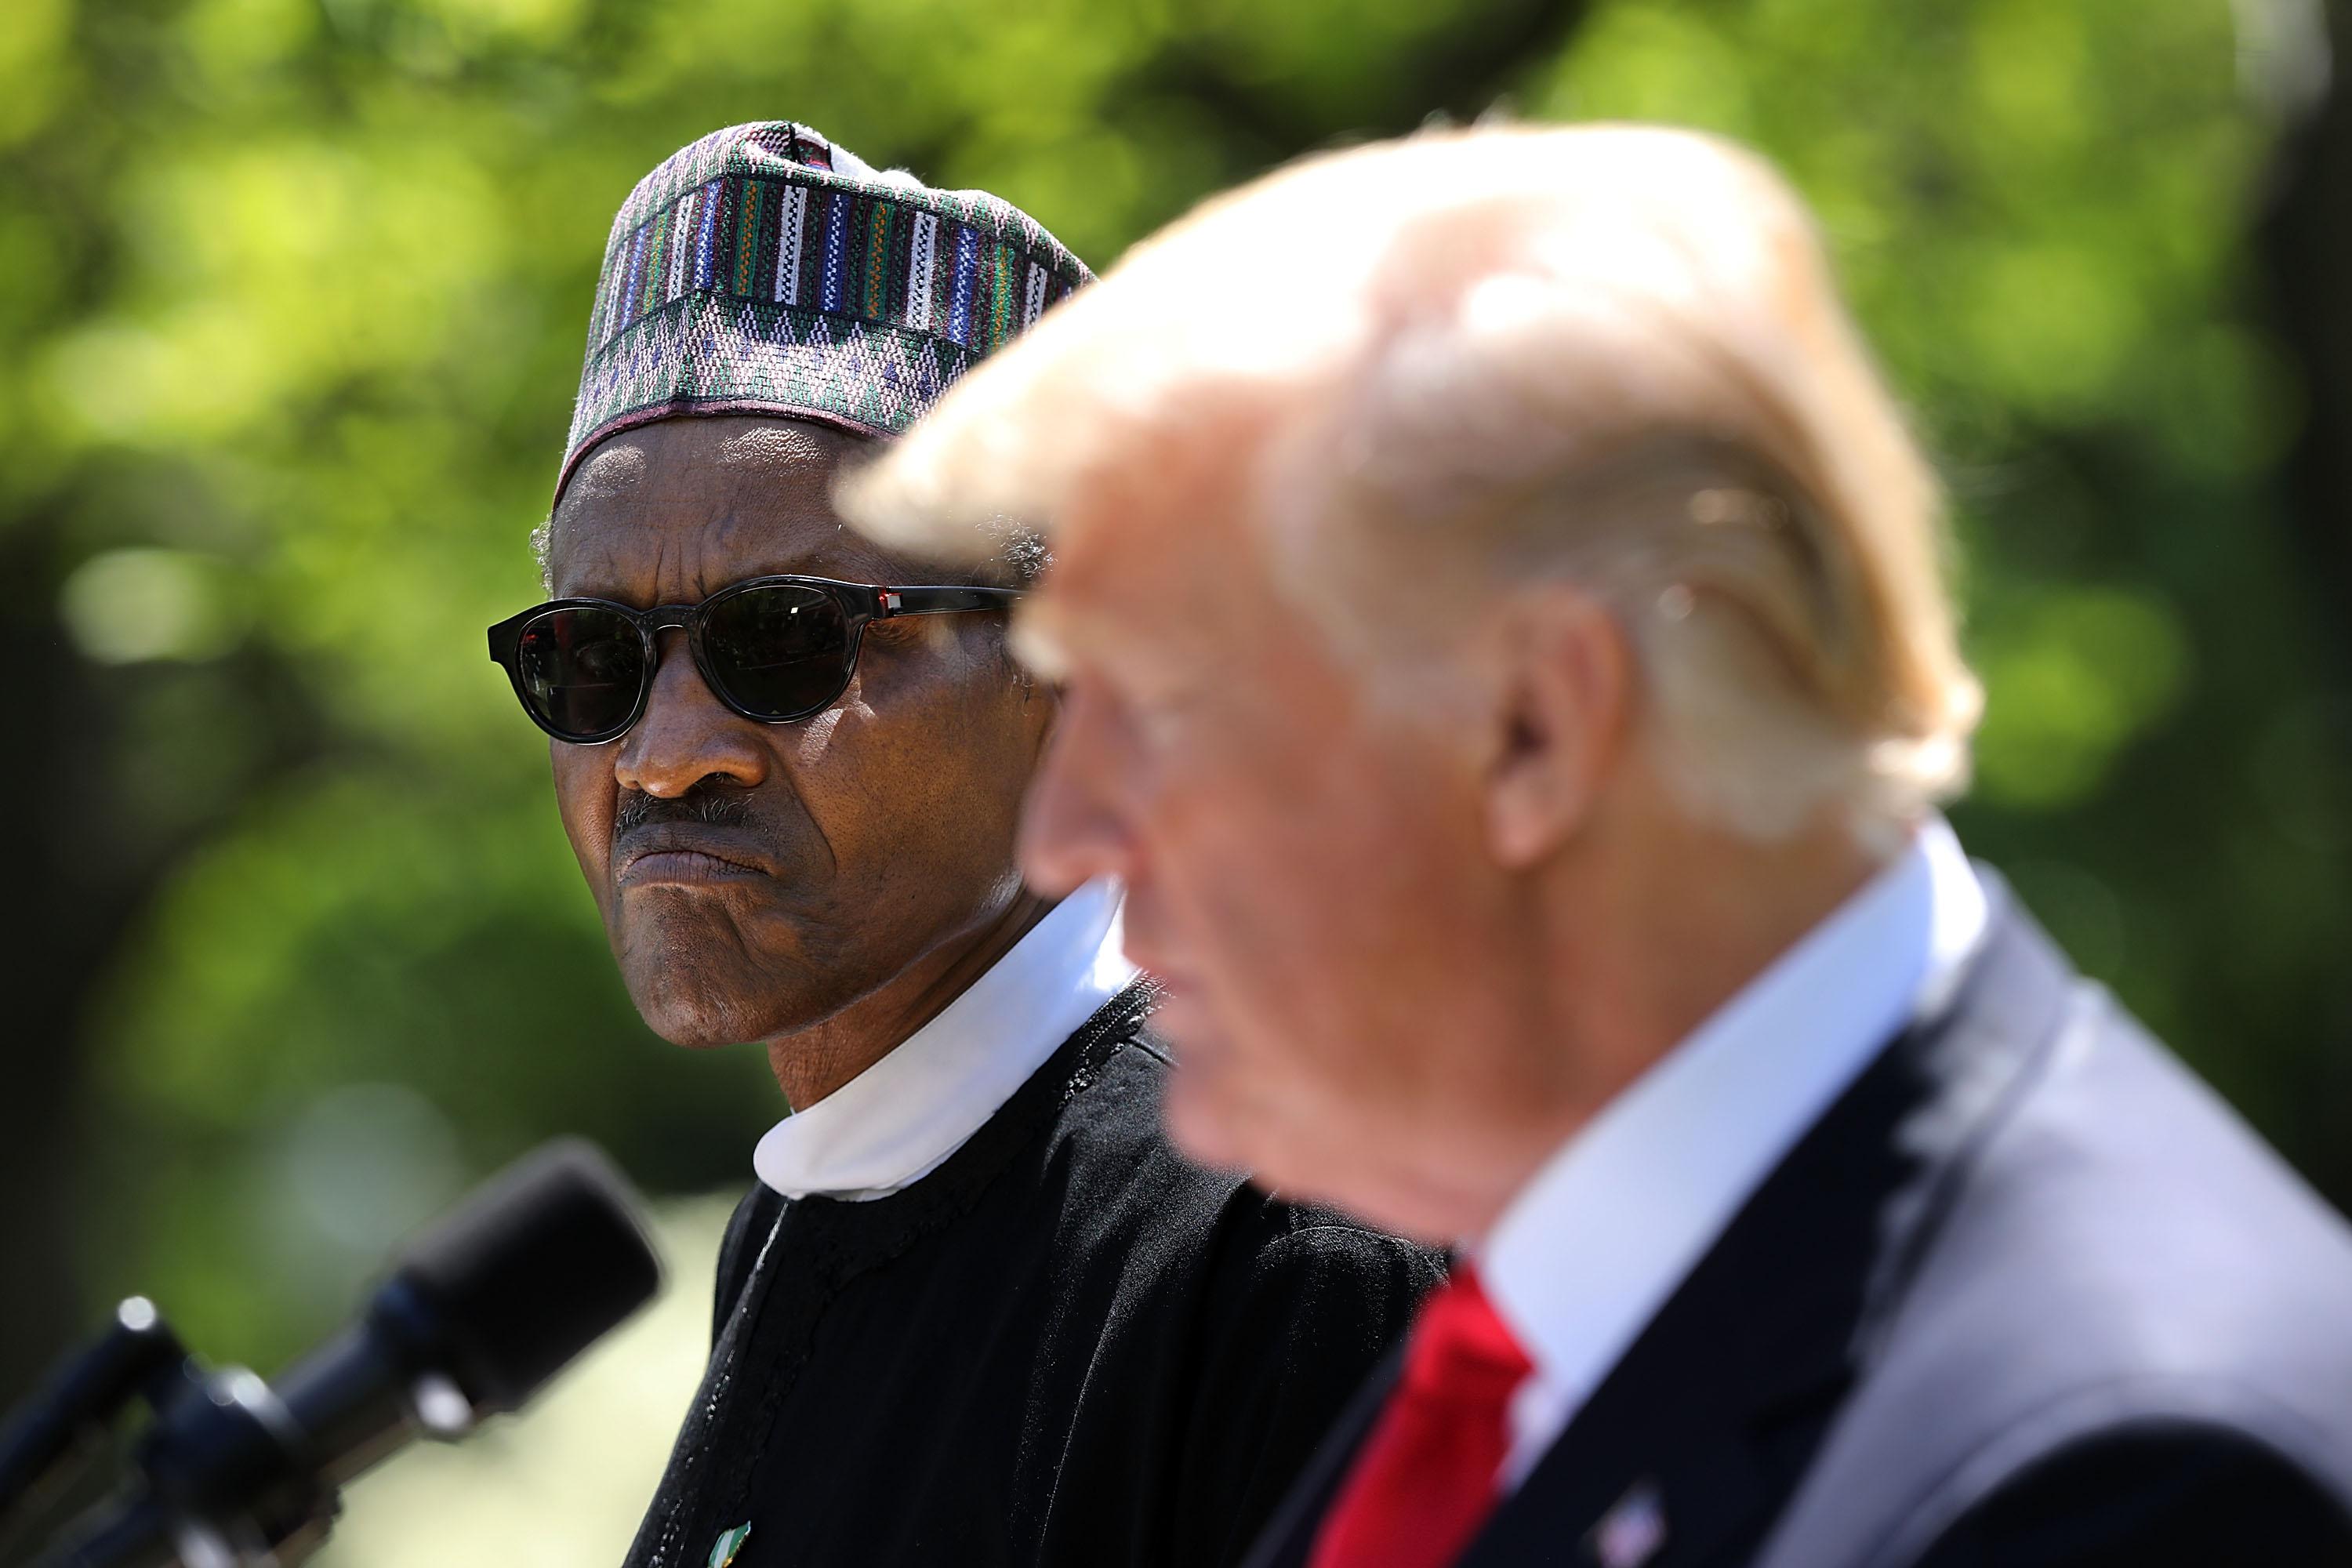 WASHINGTON, DC - APRIL 30:   Nigerian President Muhammadu Buhari (L) listens to U.S. President Donald Trump during their a joint press conference in the Rose Garden of the White House April 30, 2018 in Washington, DC. The two leaders also met in the Oval Office to discuss a range of bilateral issues earlier in the day.  (Photo by Chip Somodevilla/Getty Images)